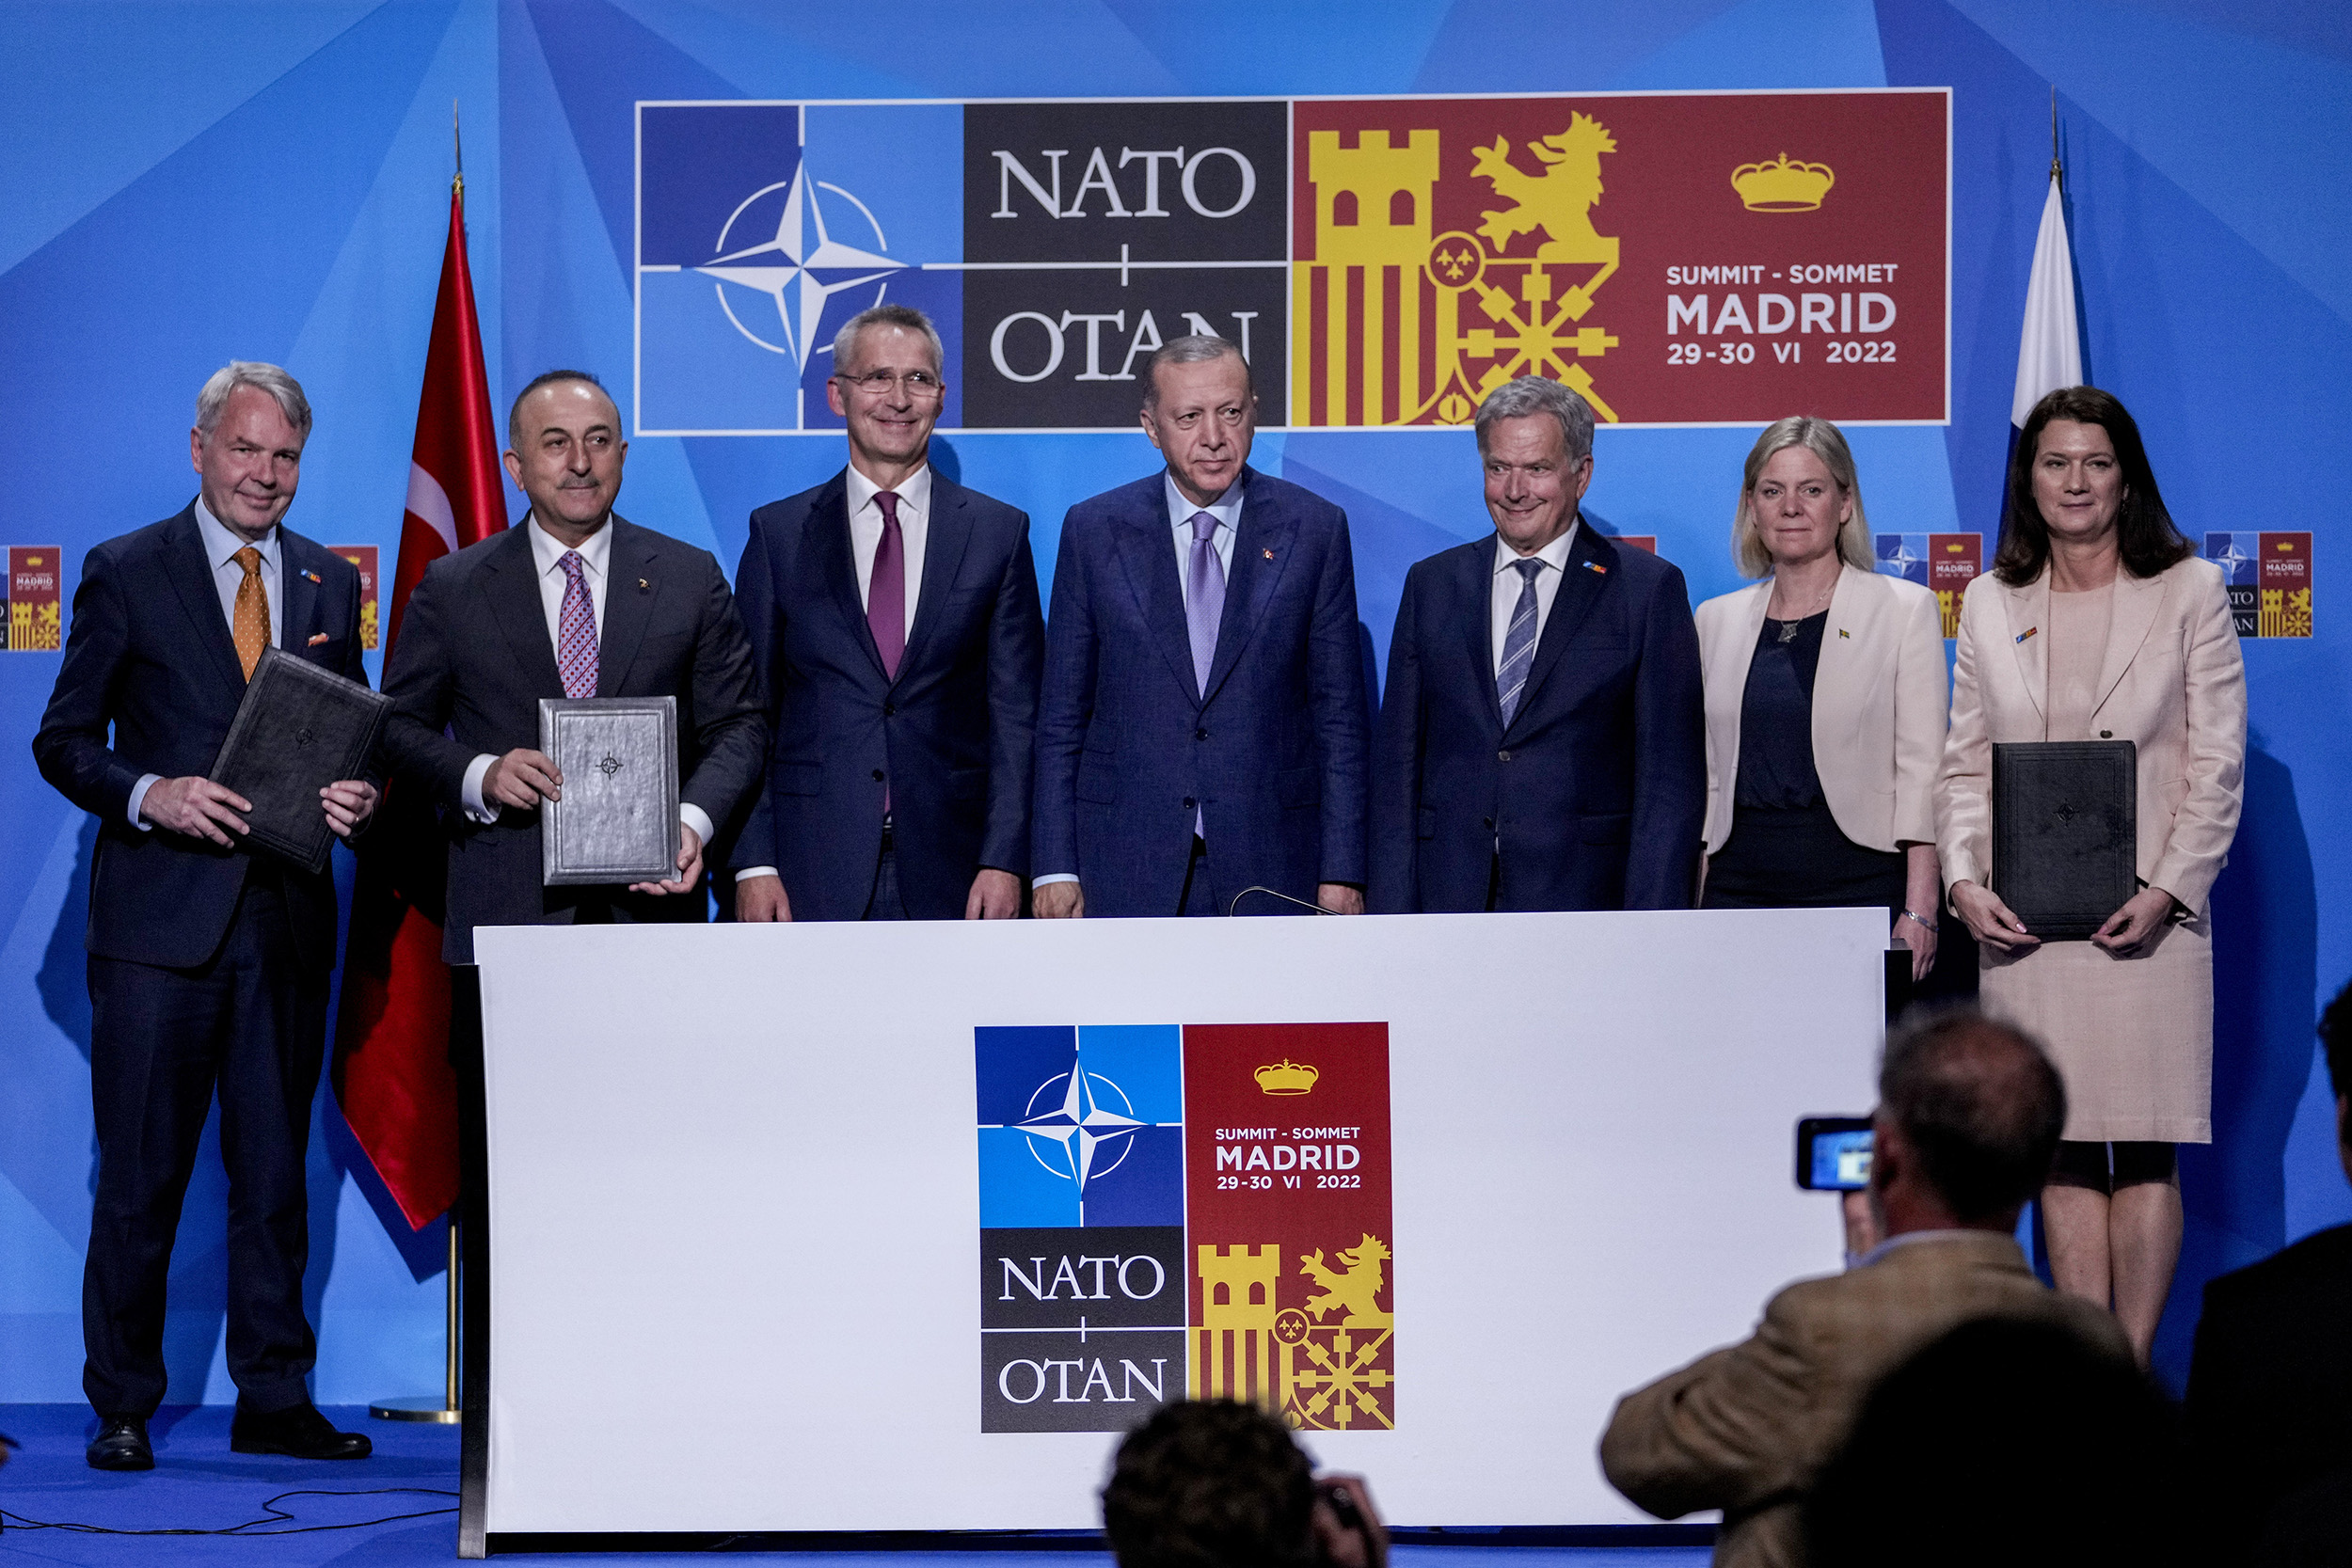 From left to right background: Finnish Foreign Minister Pekka Haavisto, Turkish Foreign Minister Mevlut Cavusoglu, NATO Secretary General Jens Stoltenberg, Turkish President Recep Tayyip Erdogan, Finland's President Sauli Niinisto, Sweden's Prime Minister Magdalena Andersson, and Sweden's Foreign Minister Ann Linde pose for a picture after signing a memorandum in which Turkey agrees to Finland and Sweden's membership of the defense alliance in Madrid, Spain, on June 28